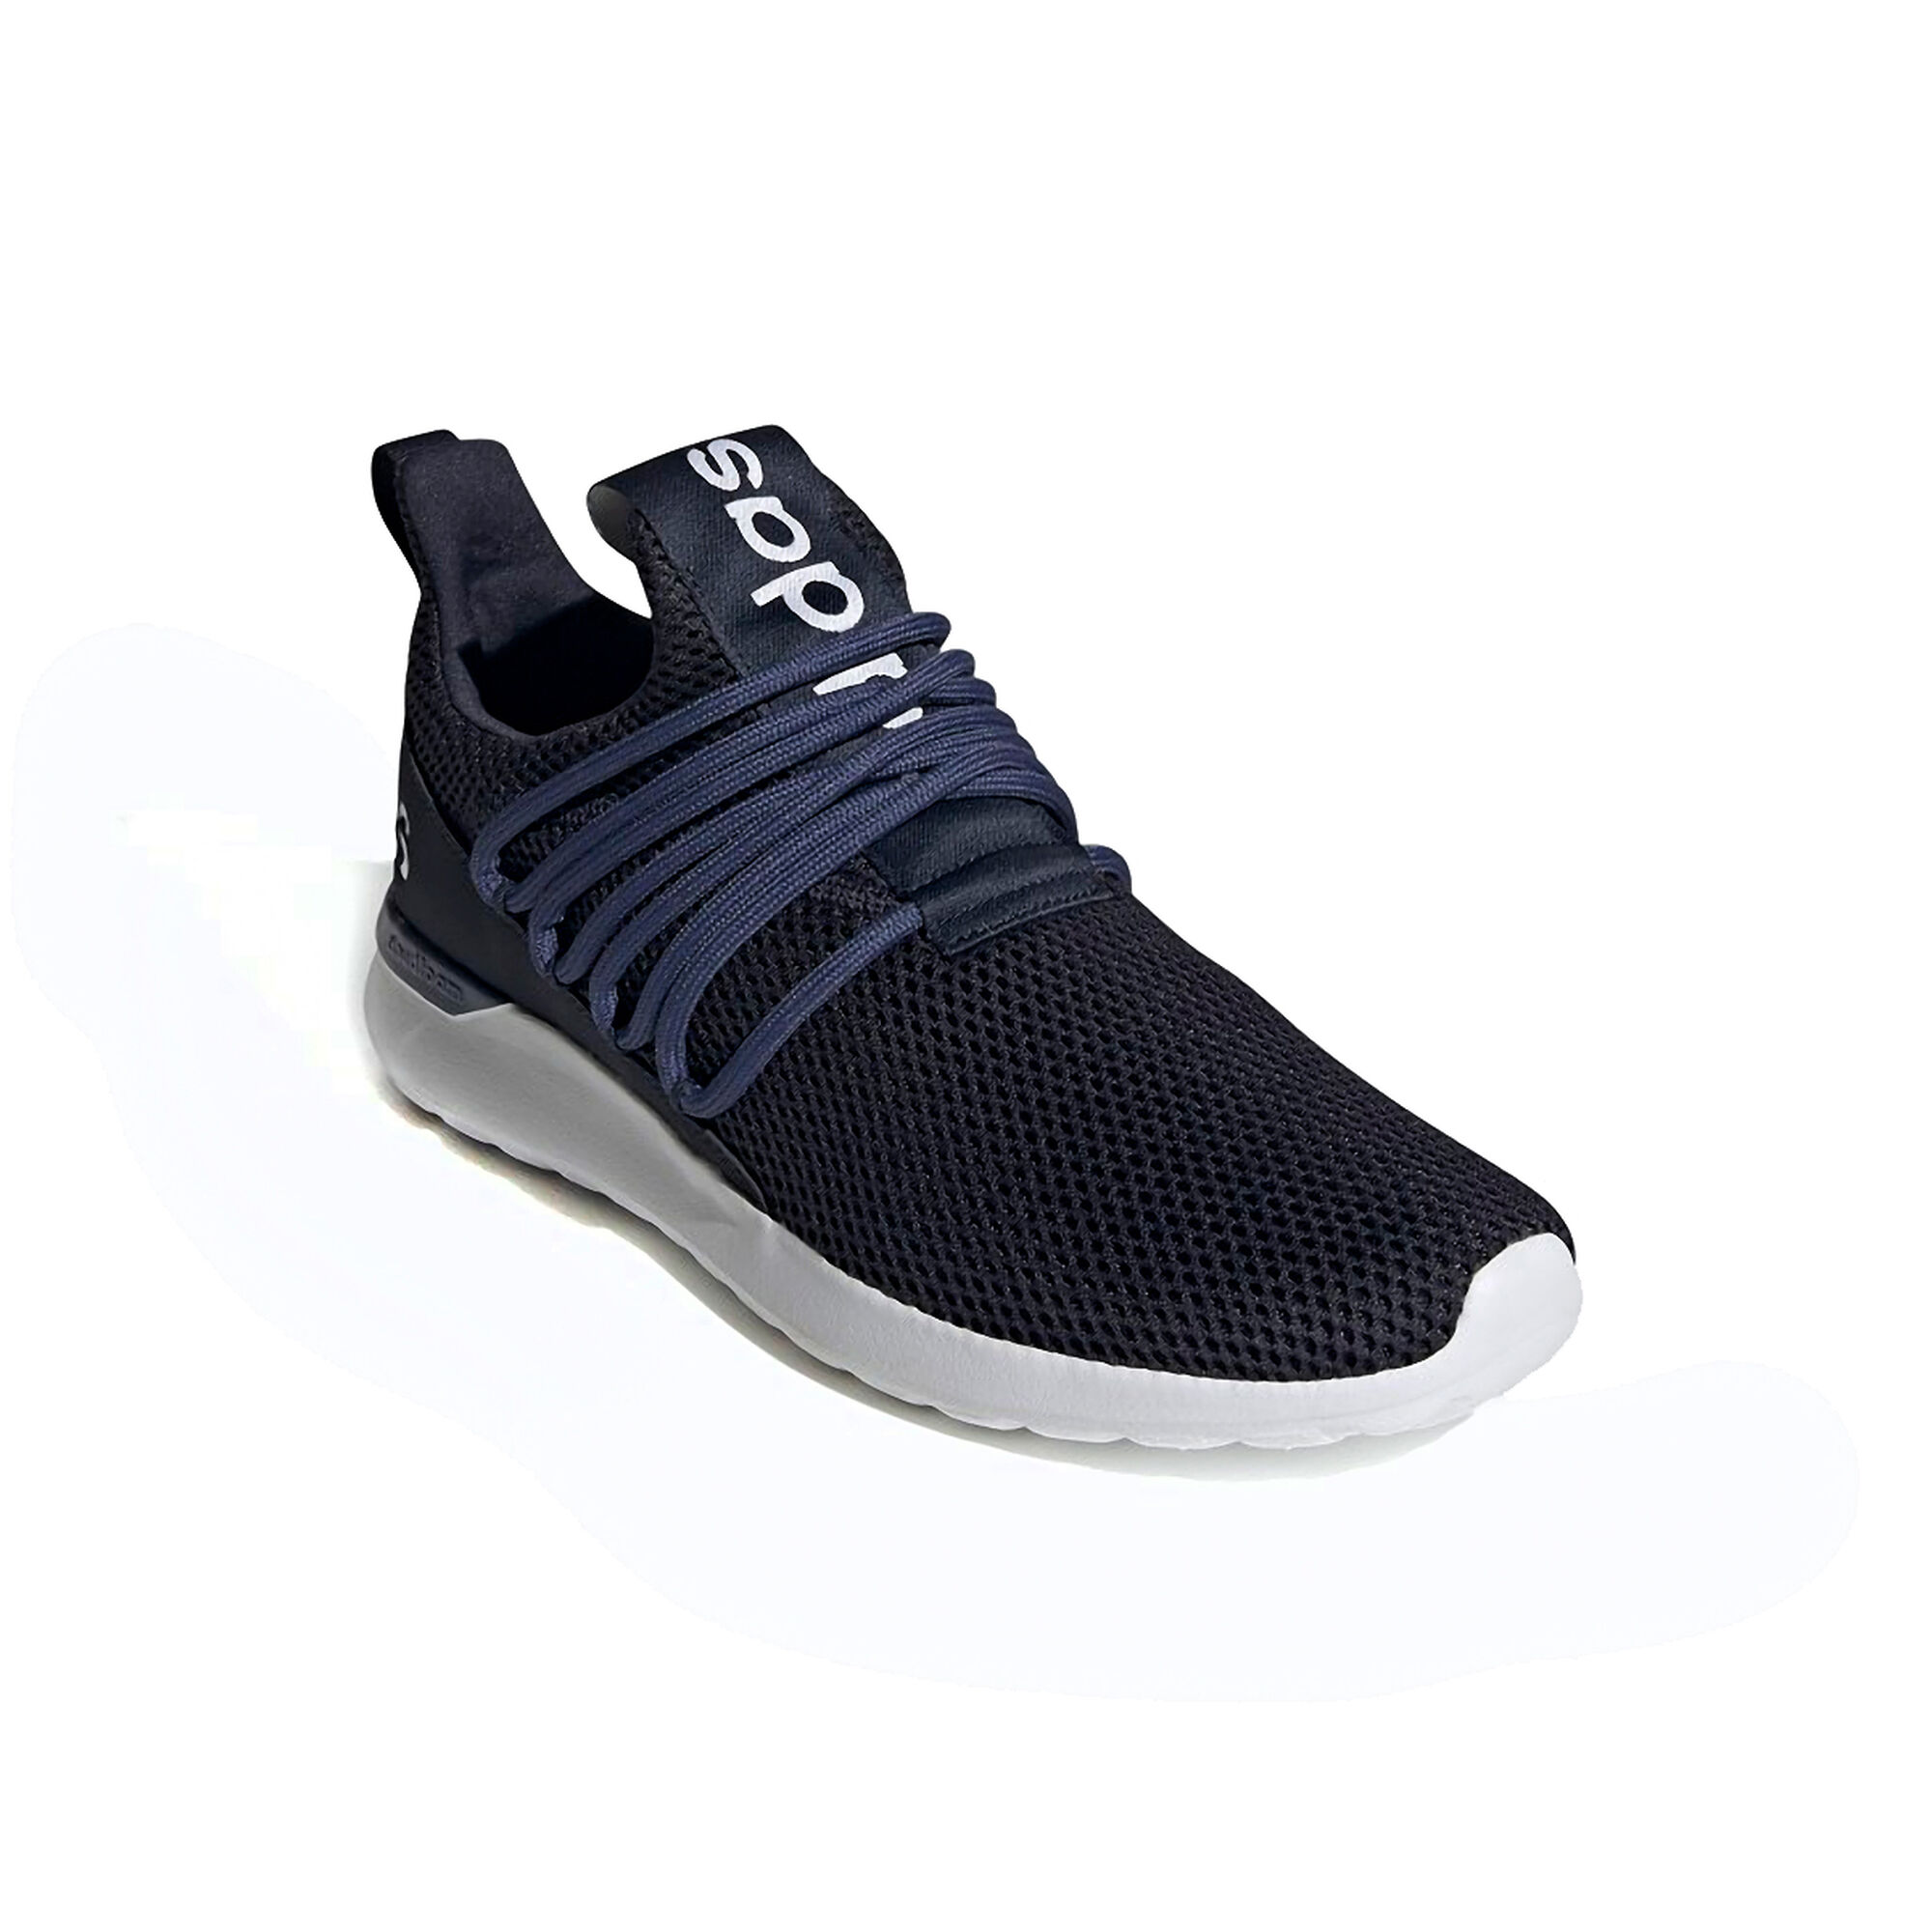 Adidas men's Lite Racer Adapt 3.0 running shoes for $35, free shipping ...